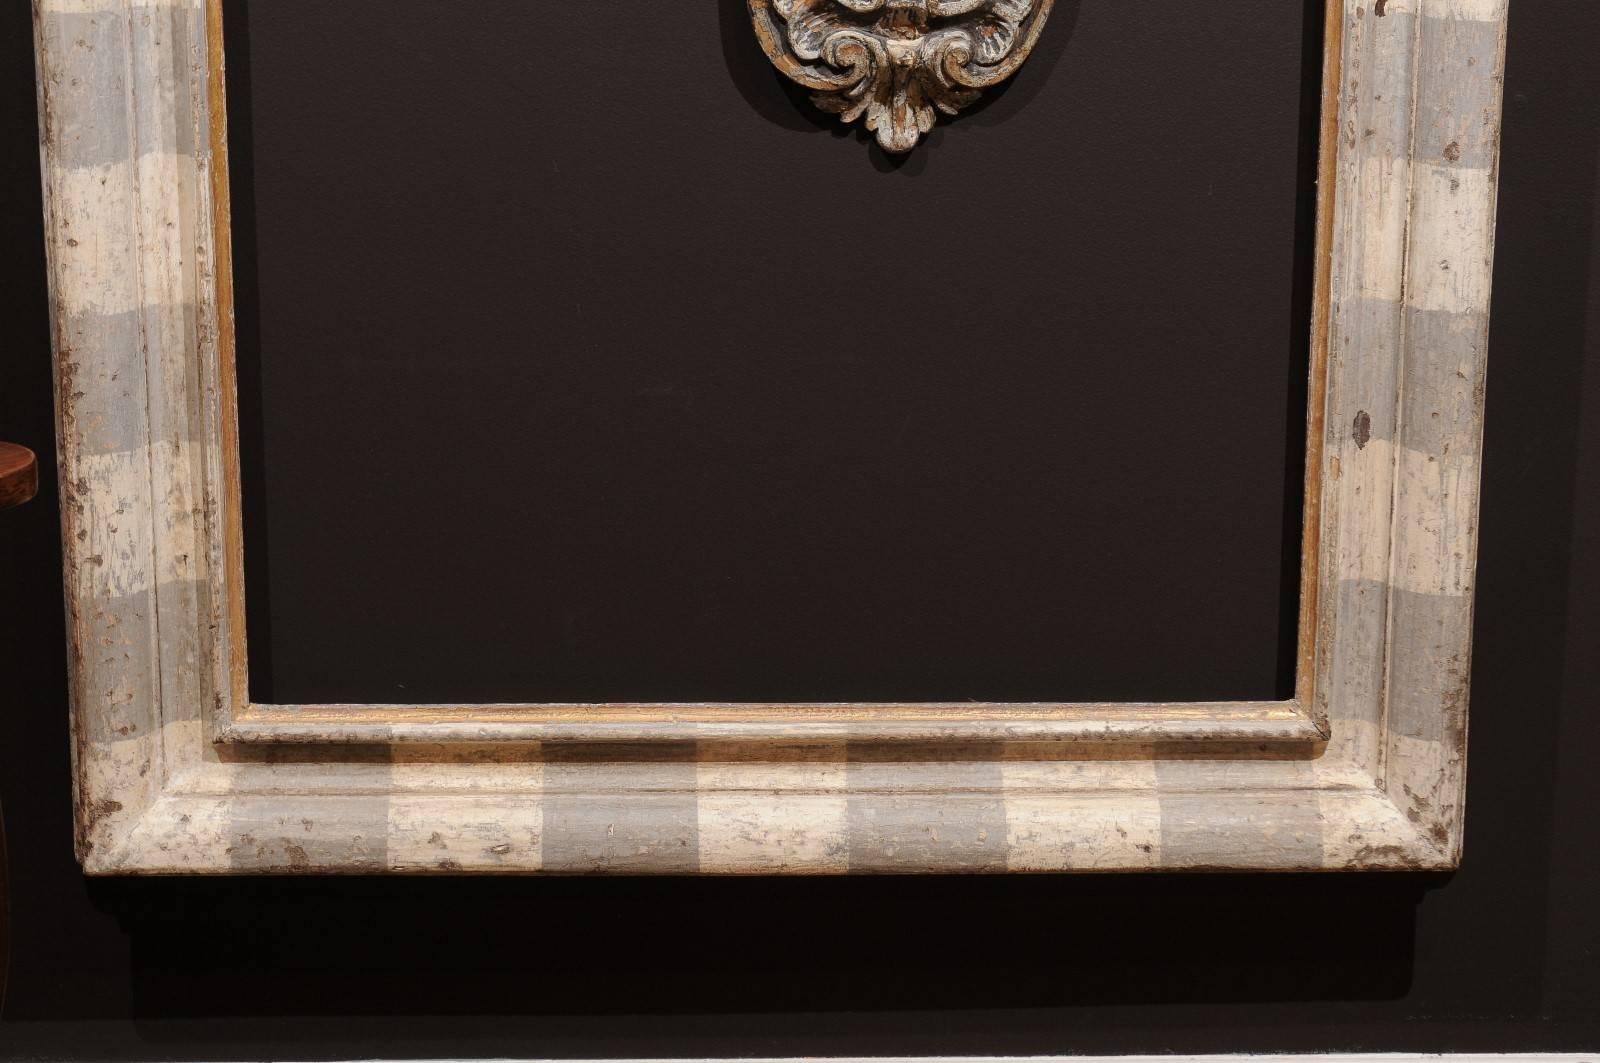  Italian Large Scale Grey and White Painted Frame with Gilt Accents - 1 Availabl 4